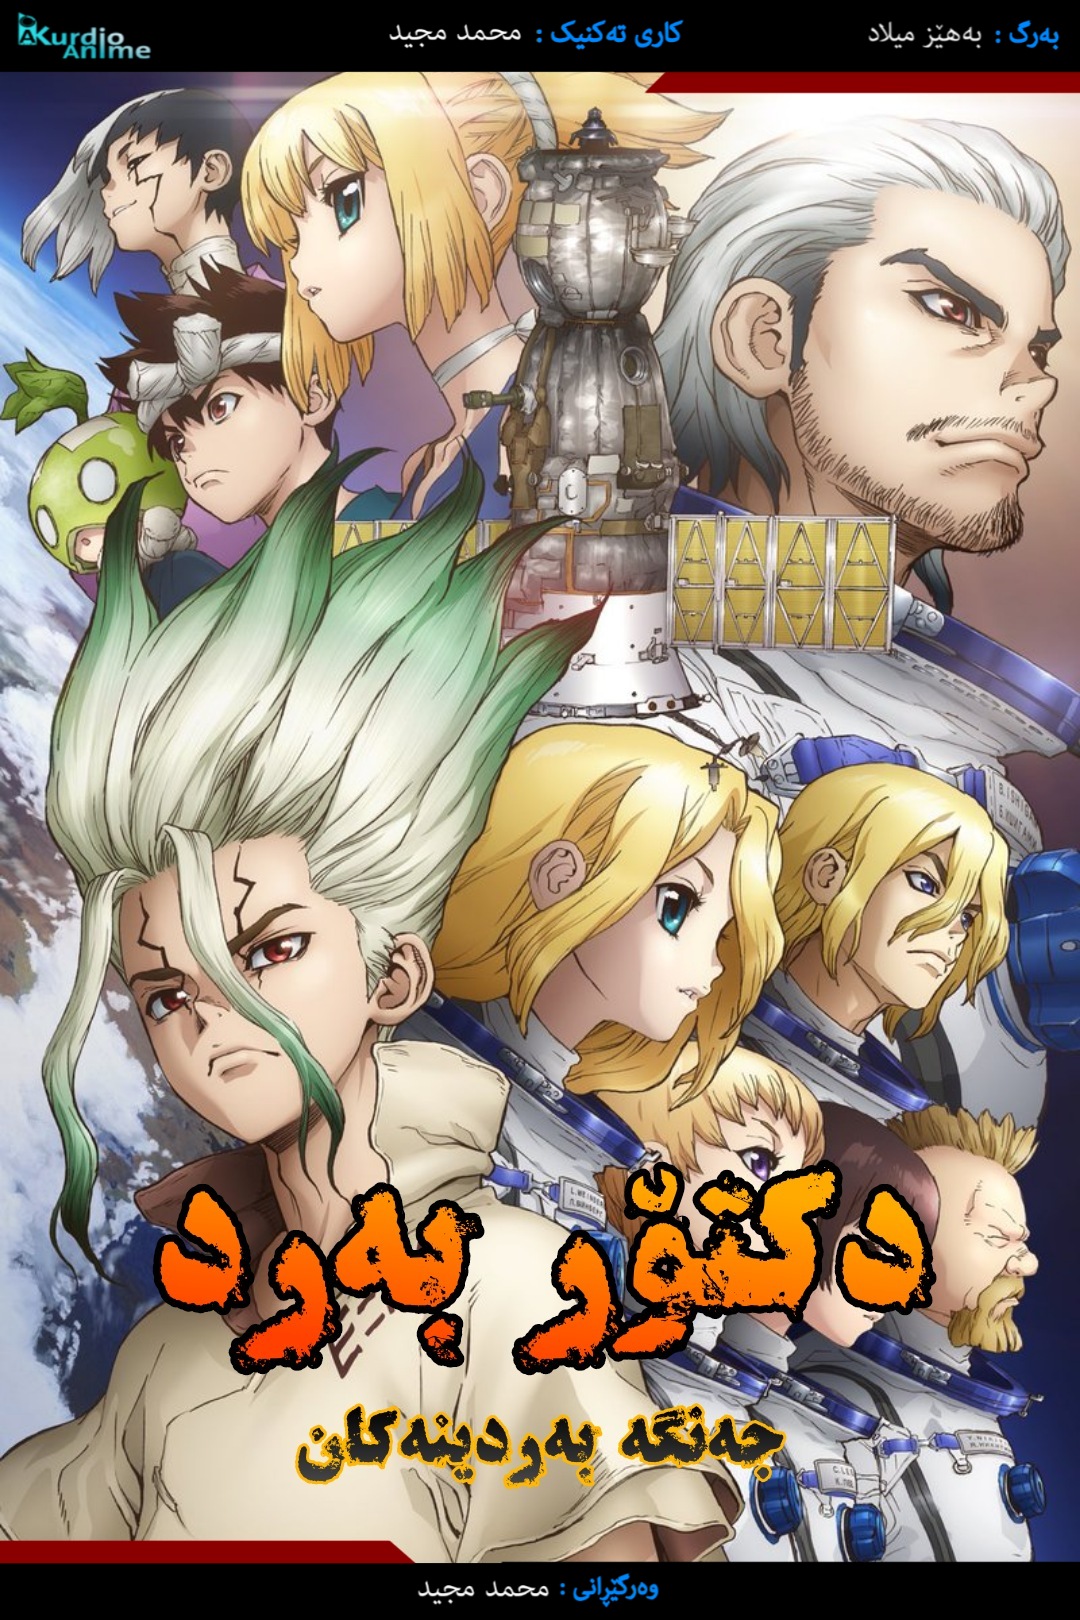 Dr. stone S2